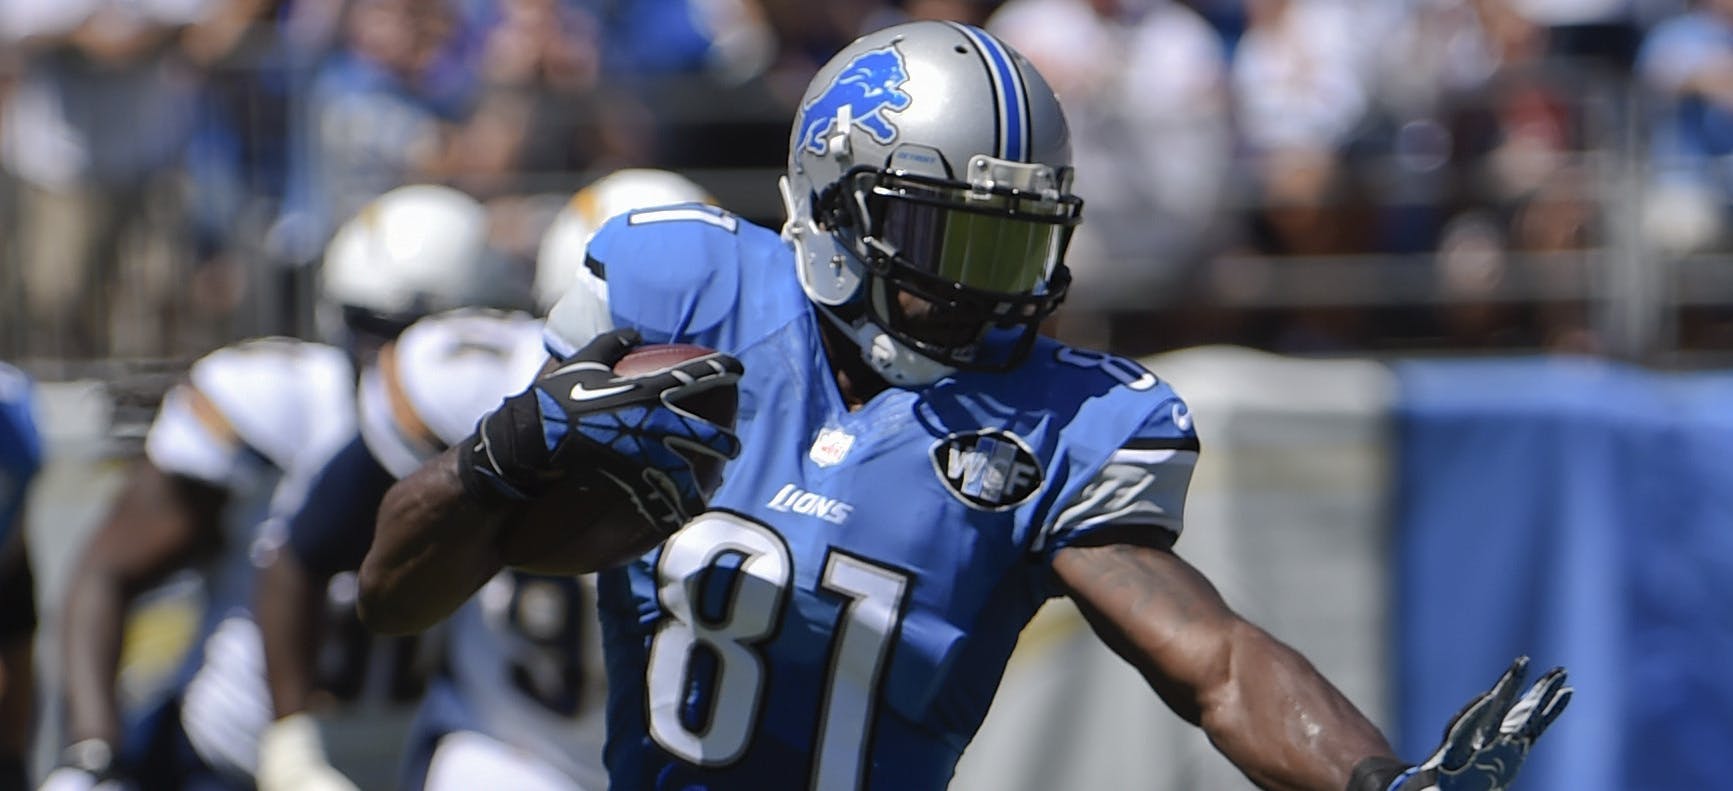 After struggling against the 49ers, will Calvin Johnson and the Lions be a bigger test for the Vikings defense? The Star Tribune's Matt Vensel and CineSport's Brian Clark preview the home opener.